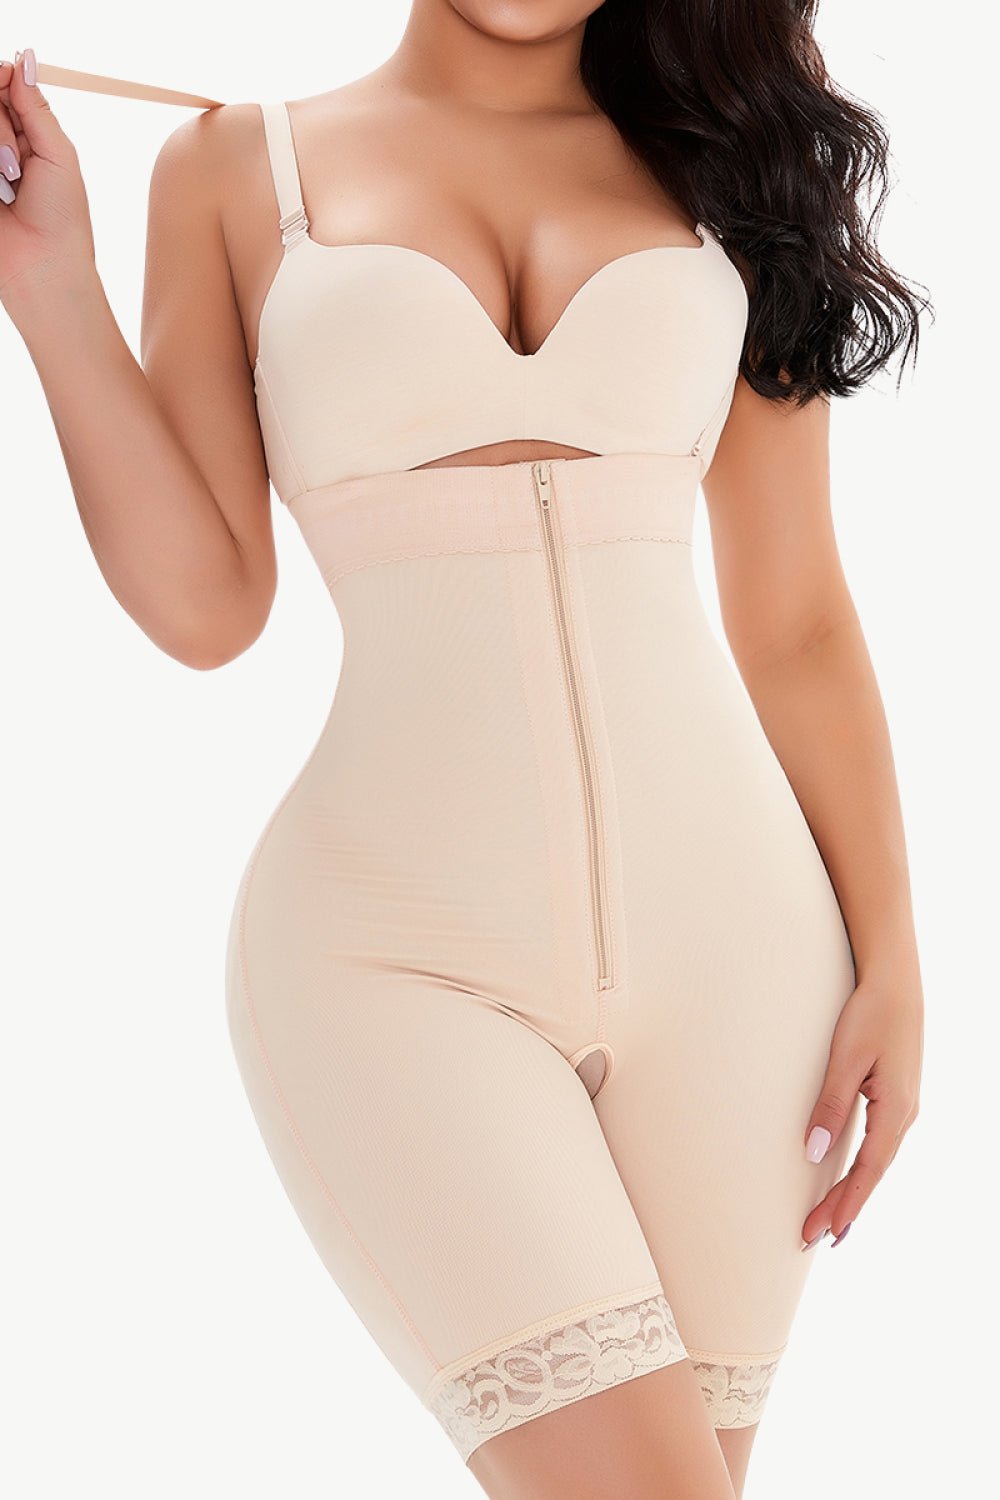 Full Size Lace Detail Zip-Up Under-Bust Shaping Bodysuit ONLINE ONLY - Beauty Junkee Collection